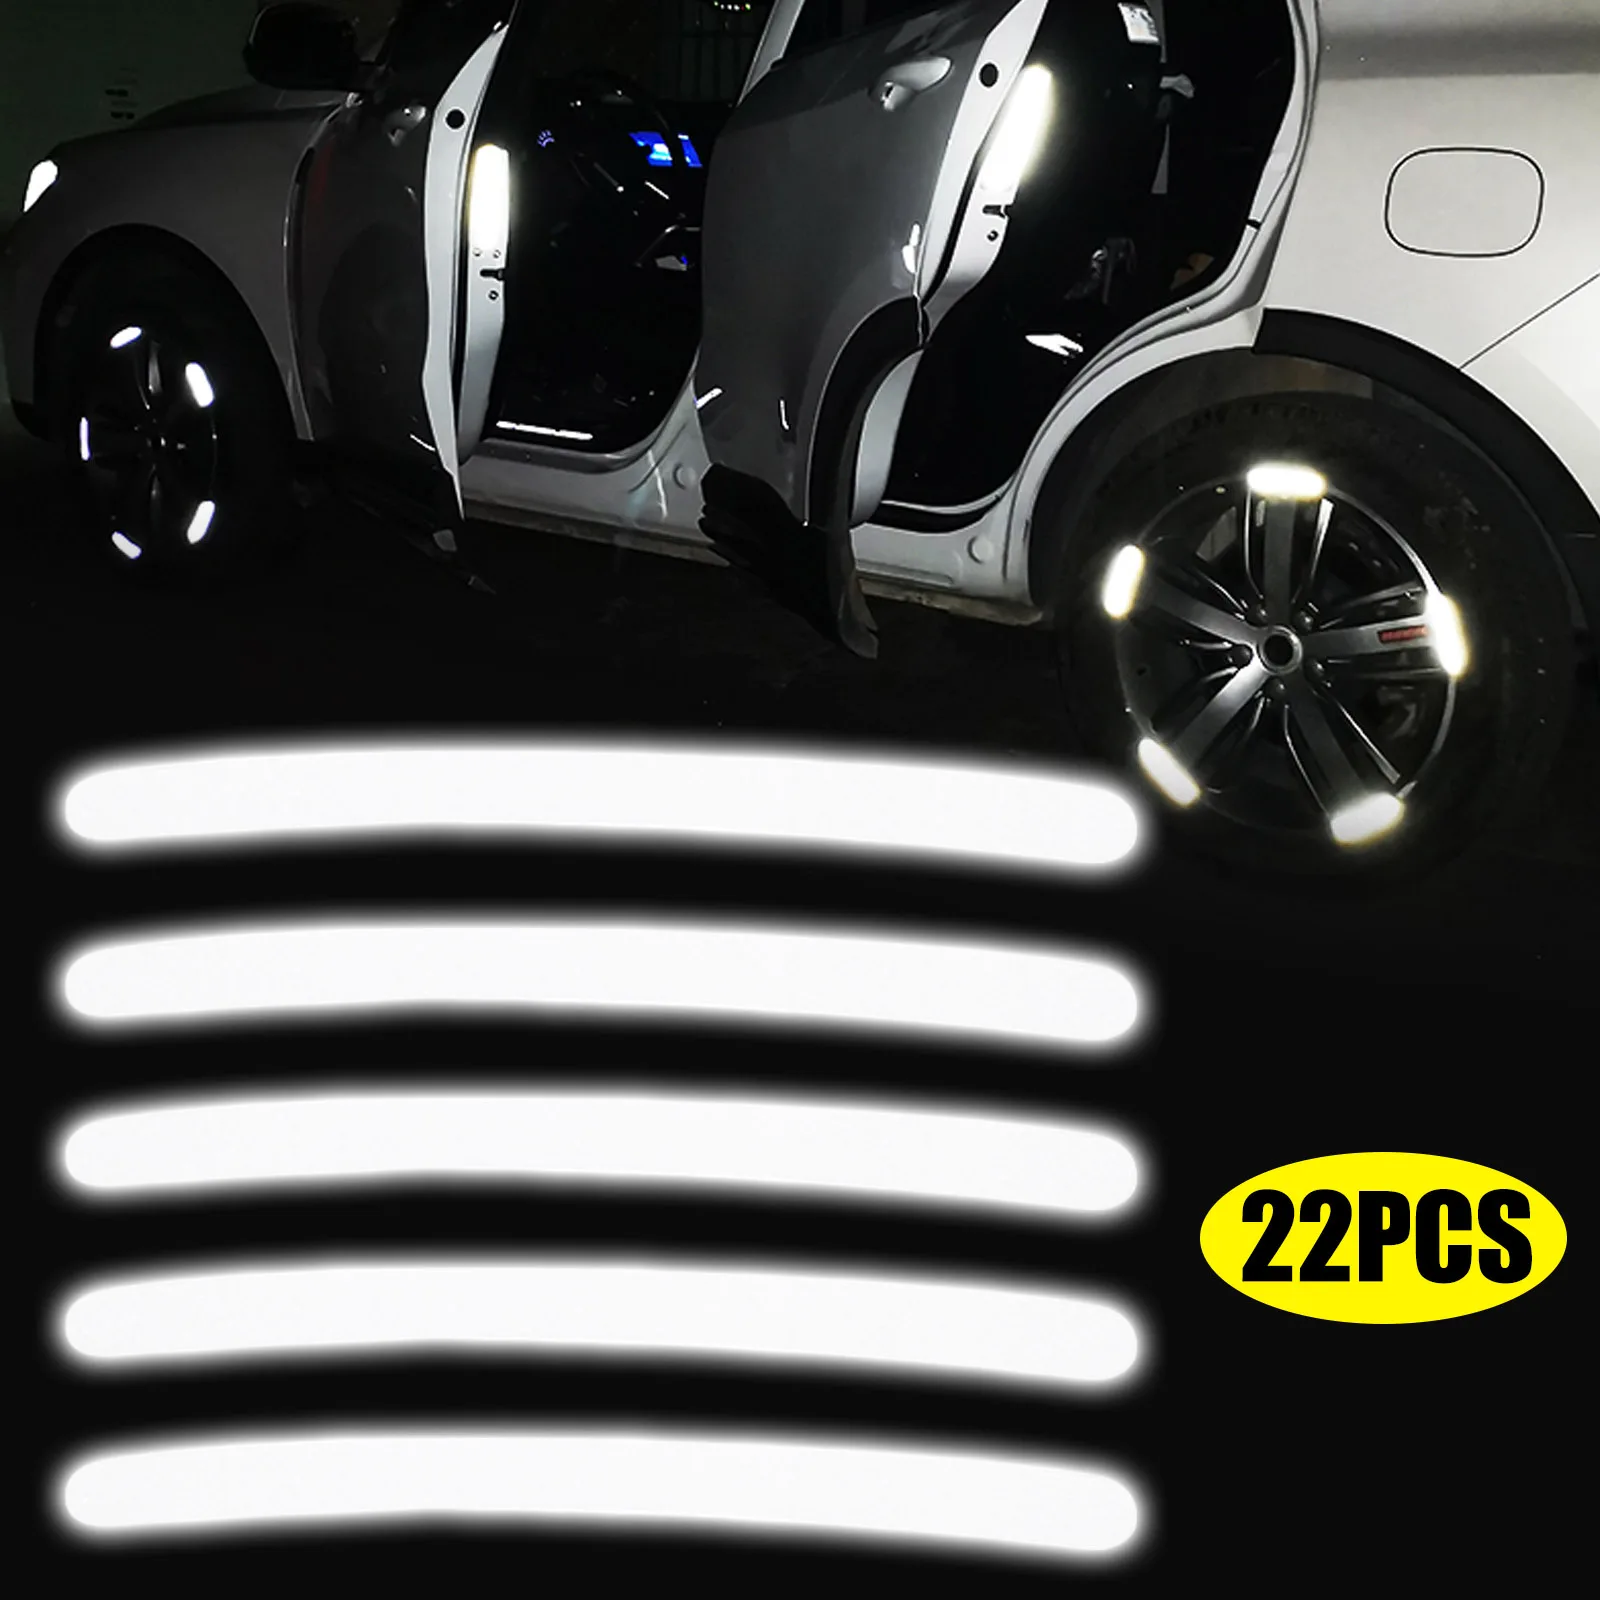 

22Pcs Car Reflective Wheel Hub Stickers Decals Safety Luminous Stripe Car Tire Rim Sticker for Car Vehicle Motorcycles Bicycles